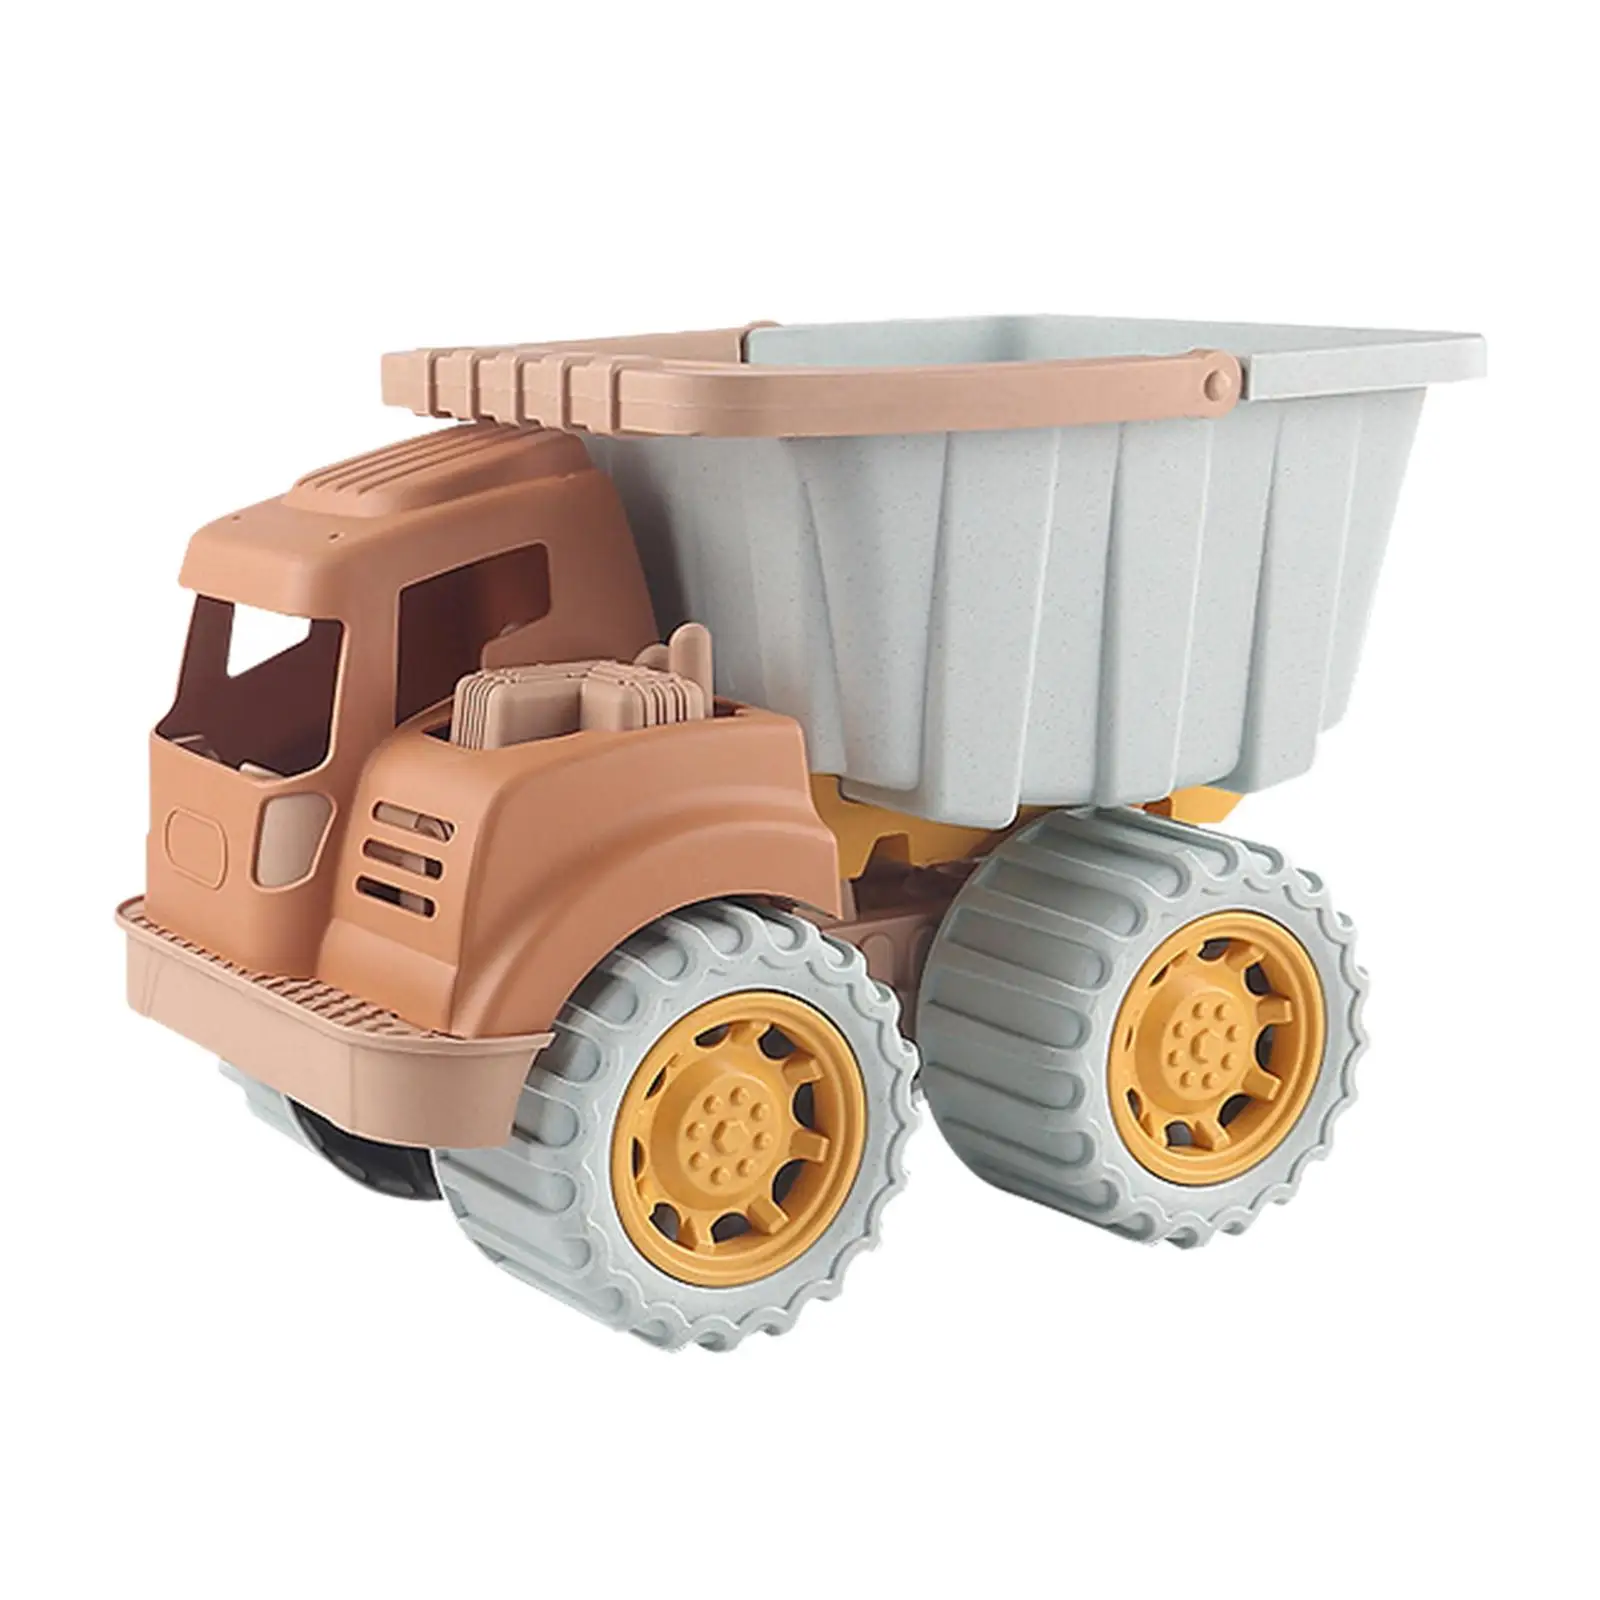 Dump Truck Toy Gross Motor Construction Toy Fine Motor Skills Sand Truck for Birthday Gift Party Favors Sand Beach Toy Children